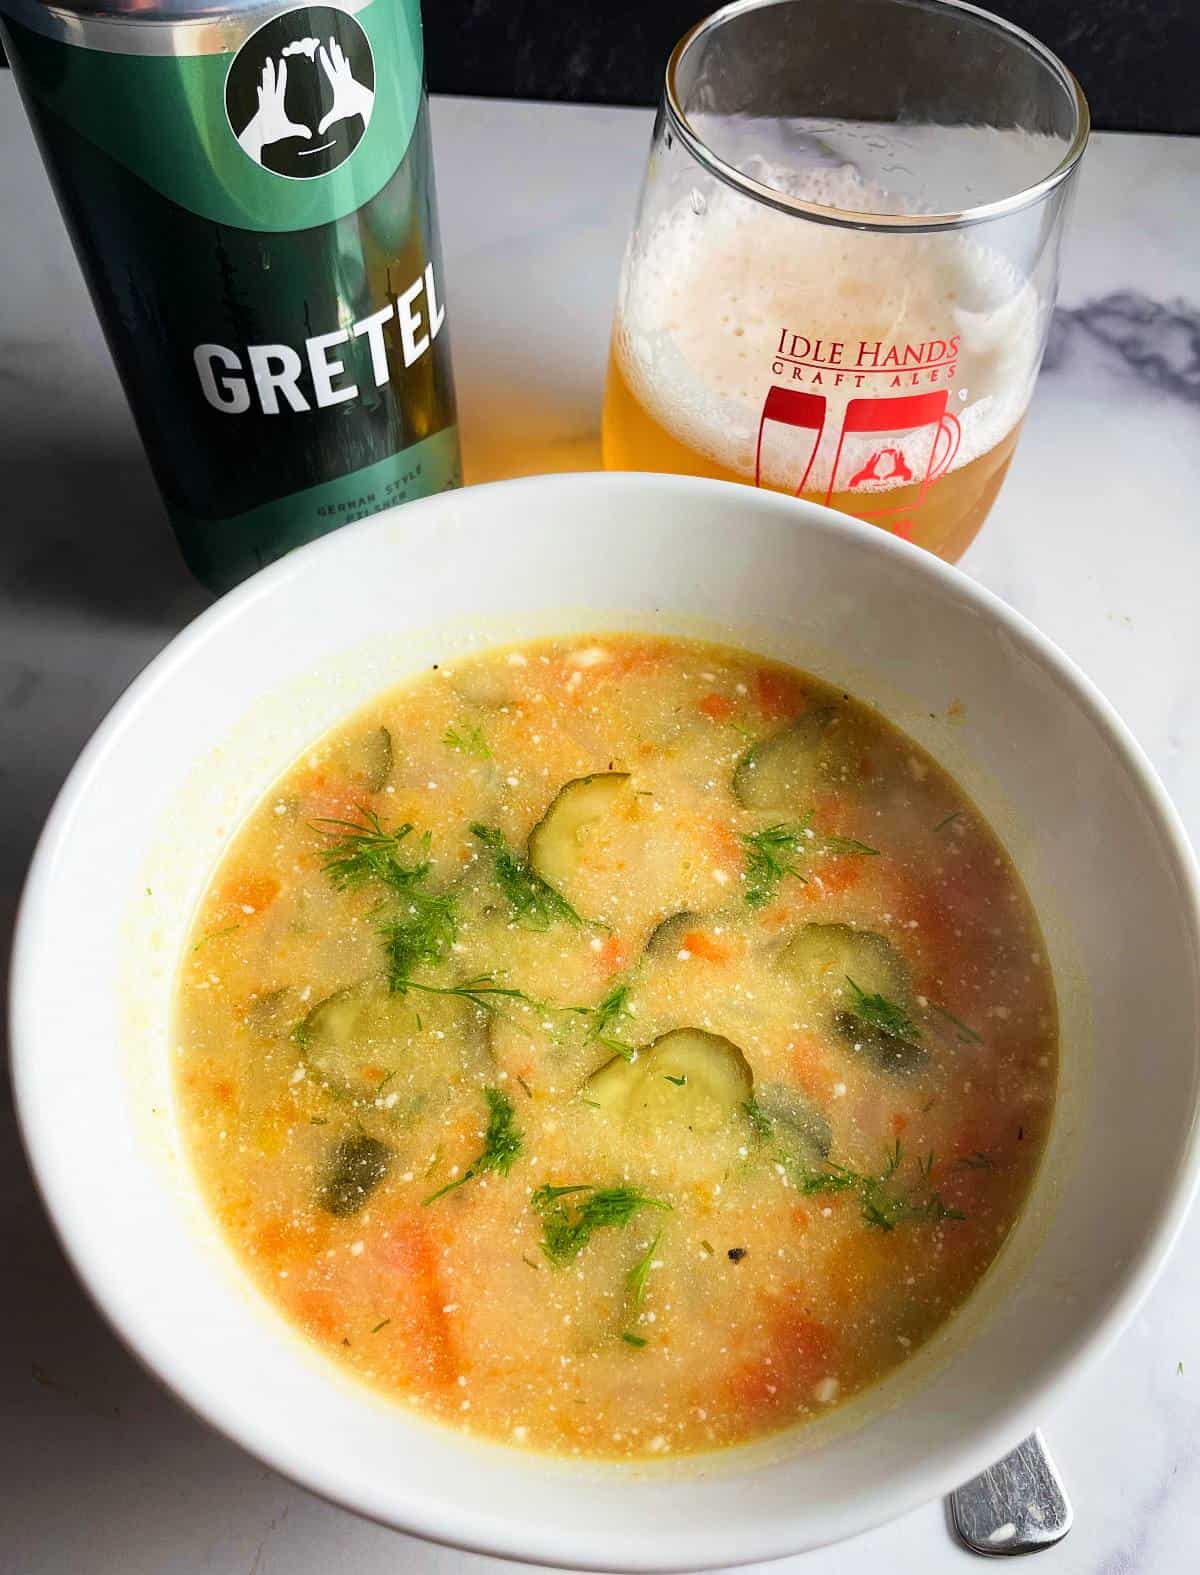 Polish dill pickle soup served along with a glass of Idle Hands Gretel beer.